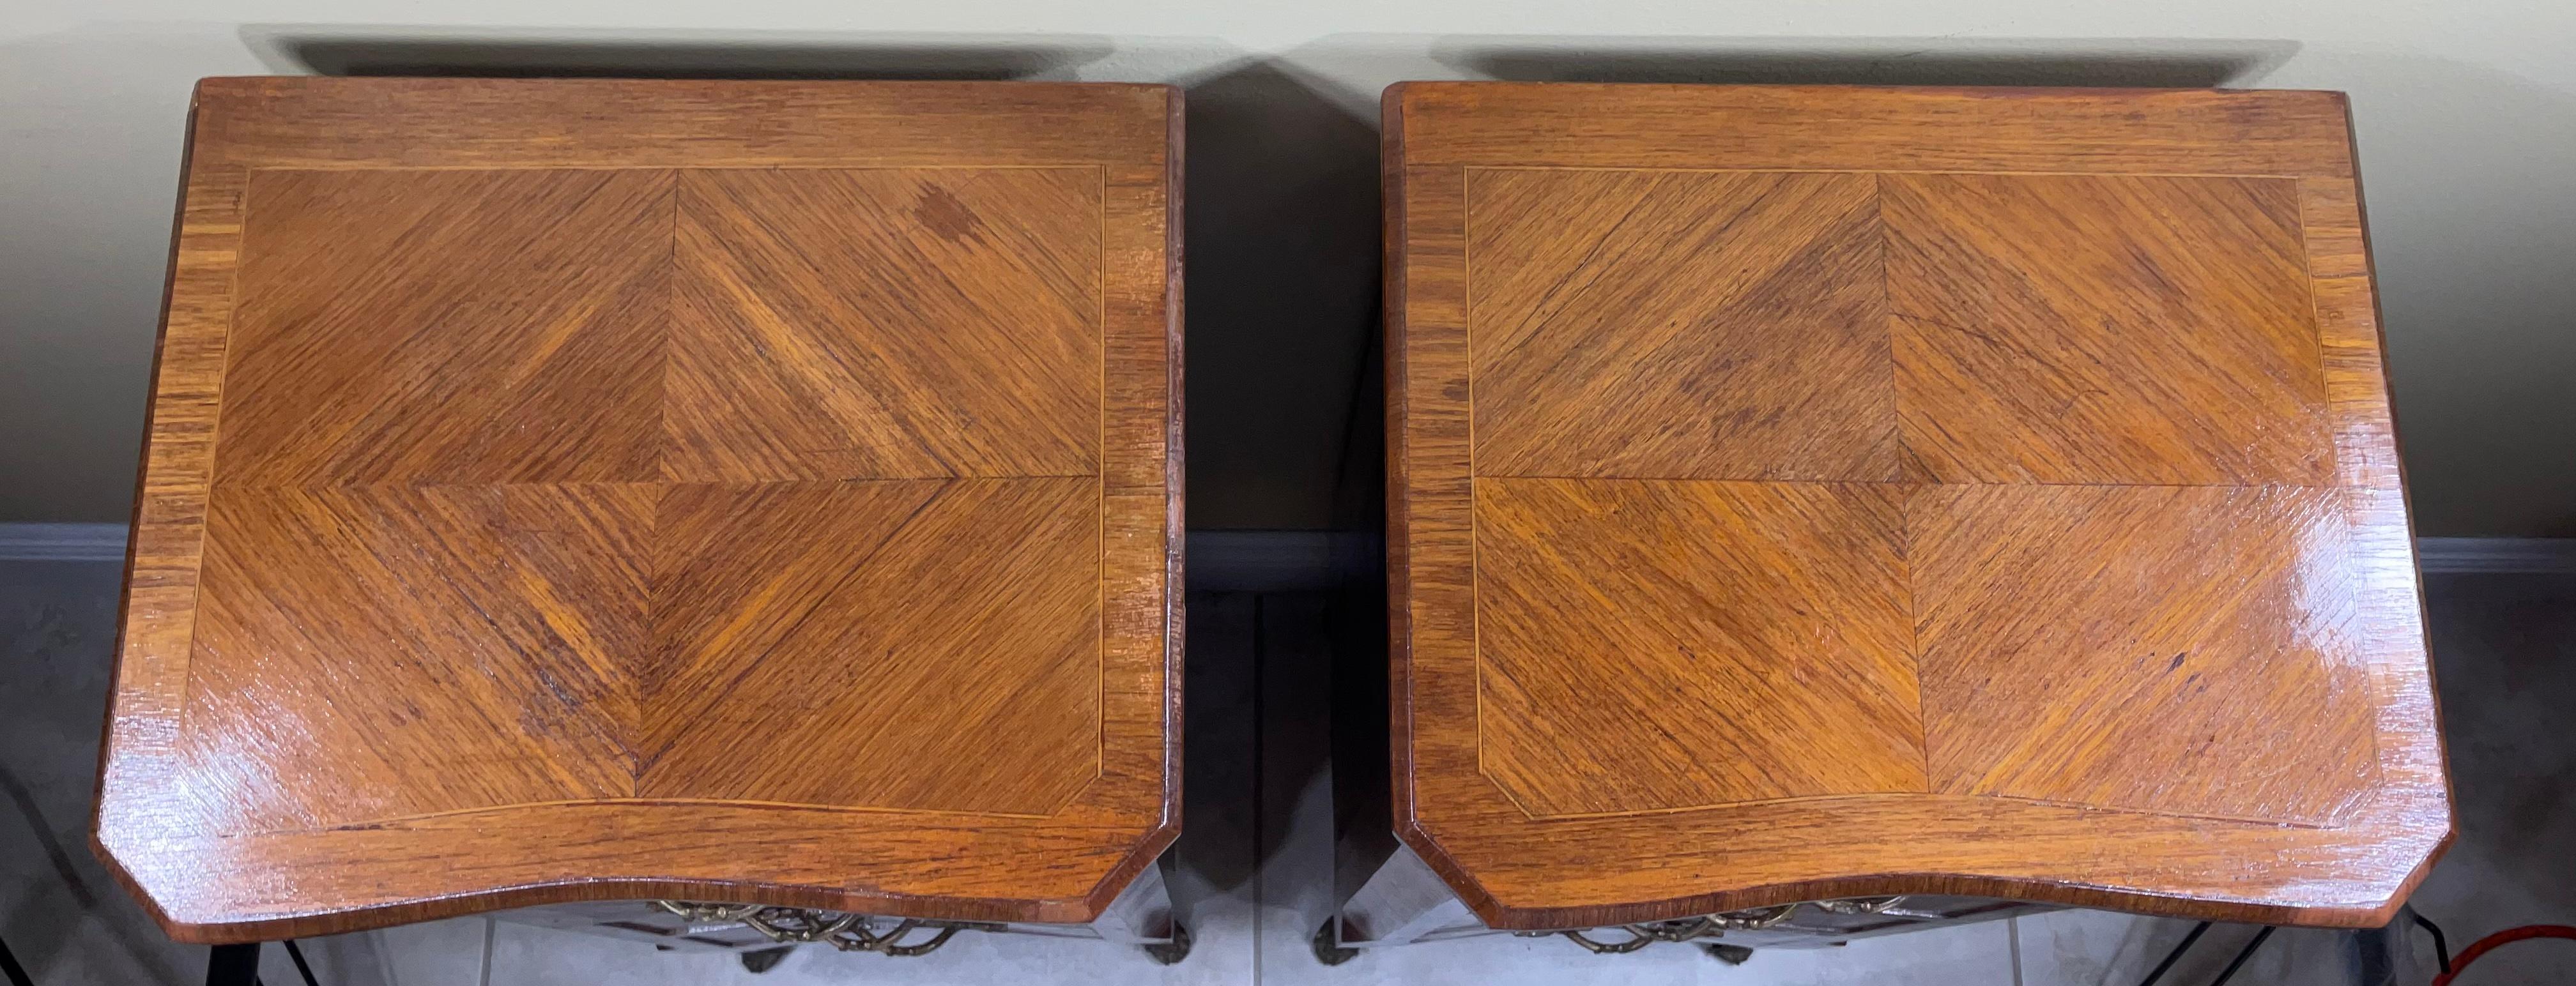 20th Century Italian Inlay Wood Pair of Nightstands For Sale 10